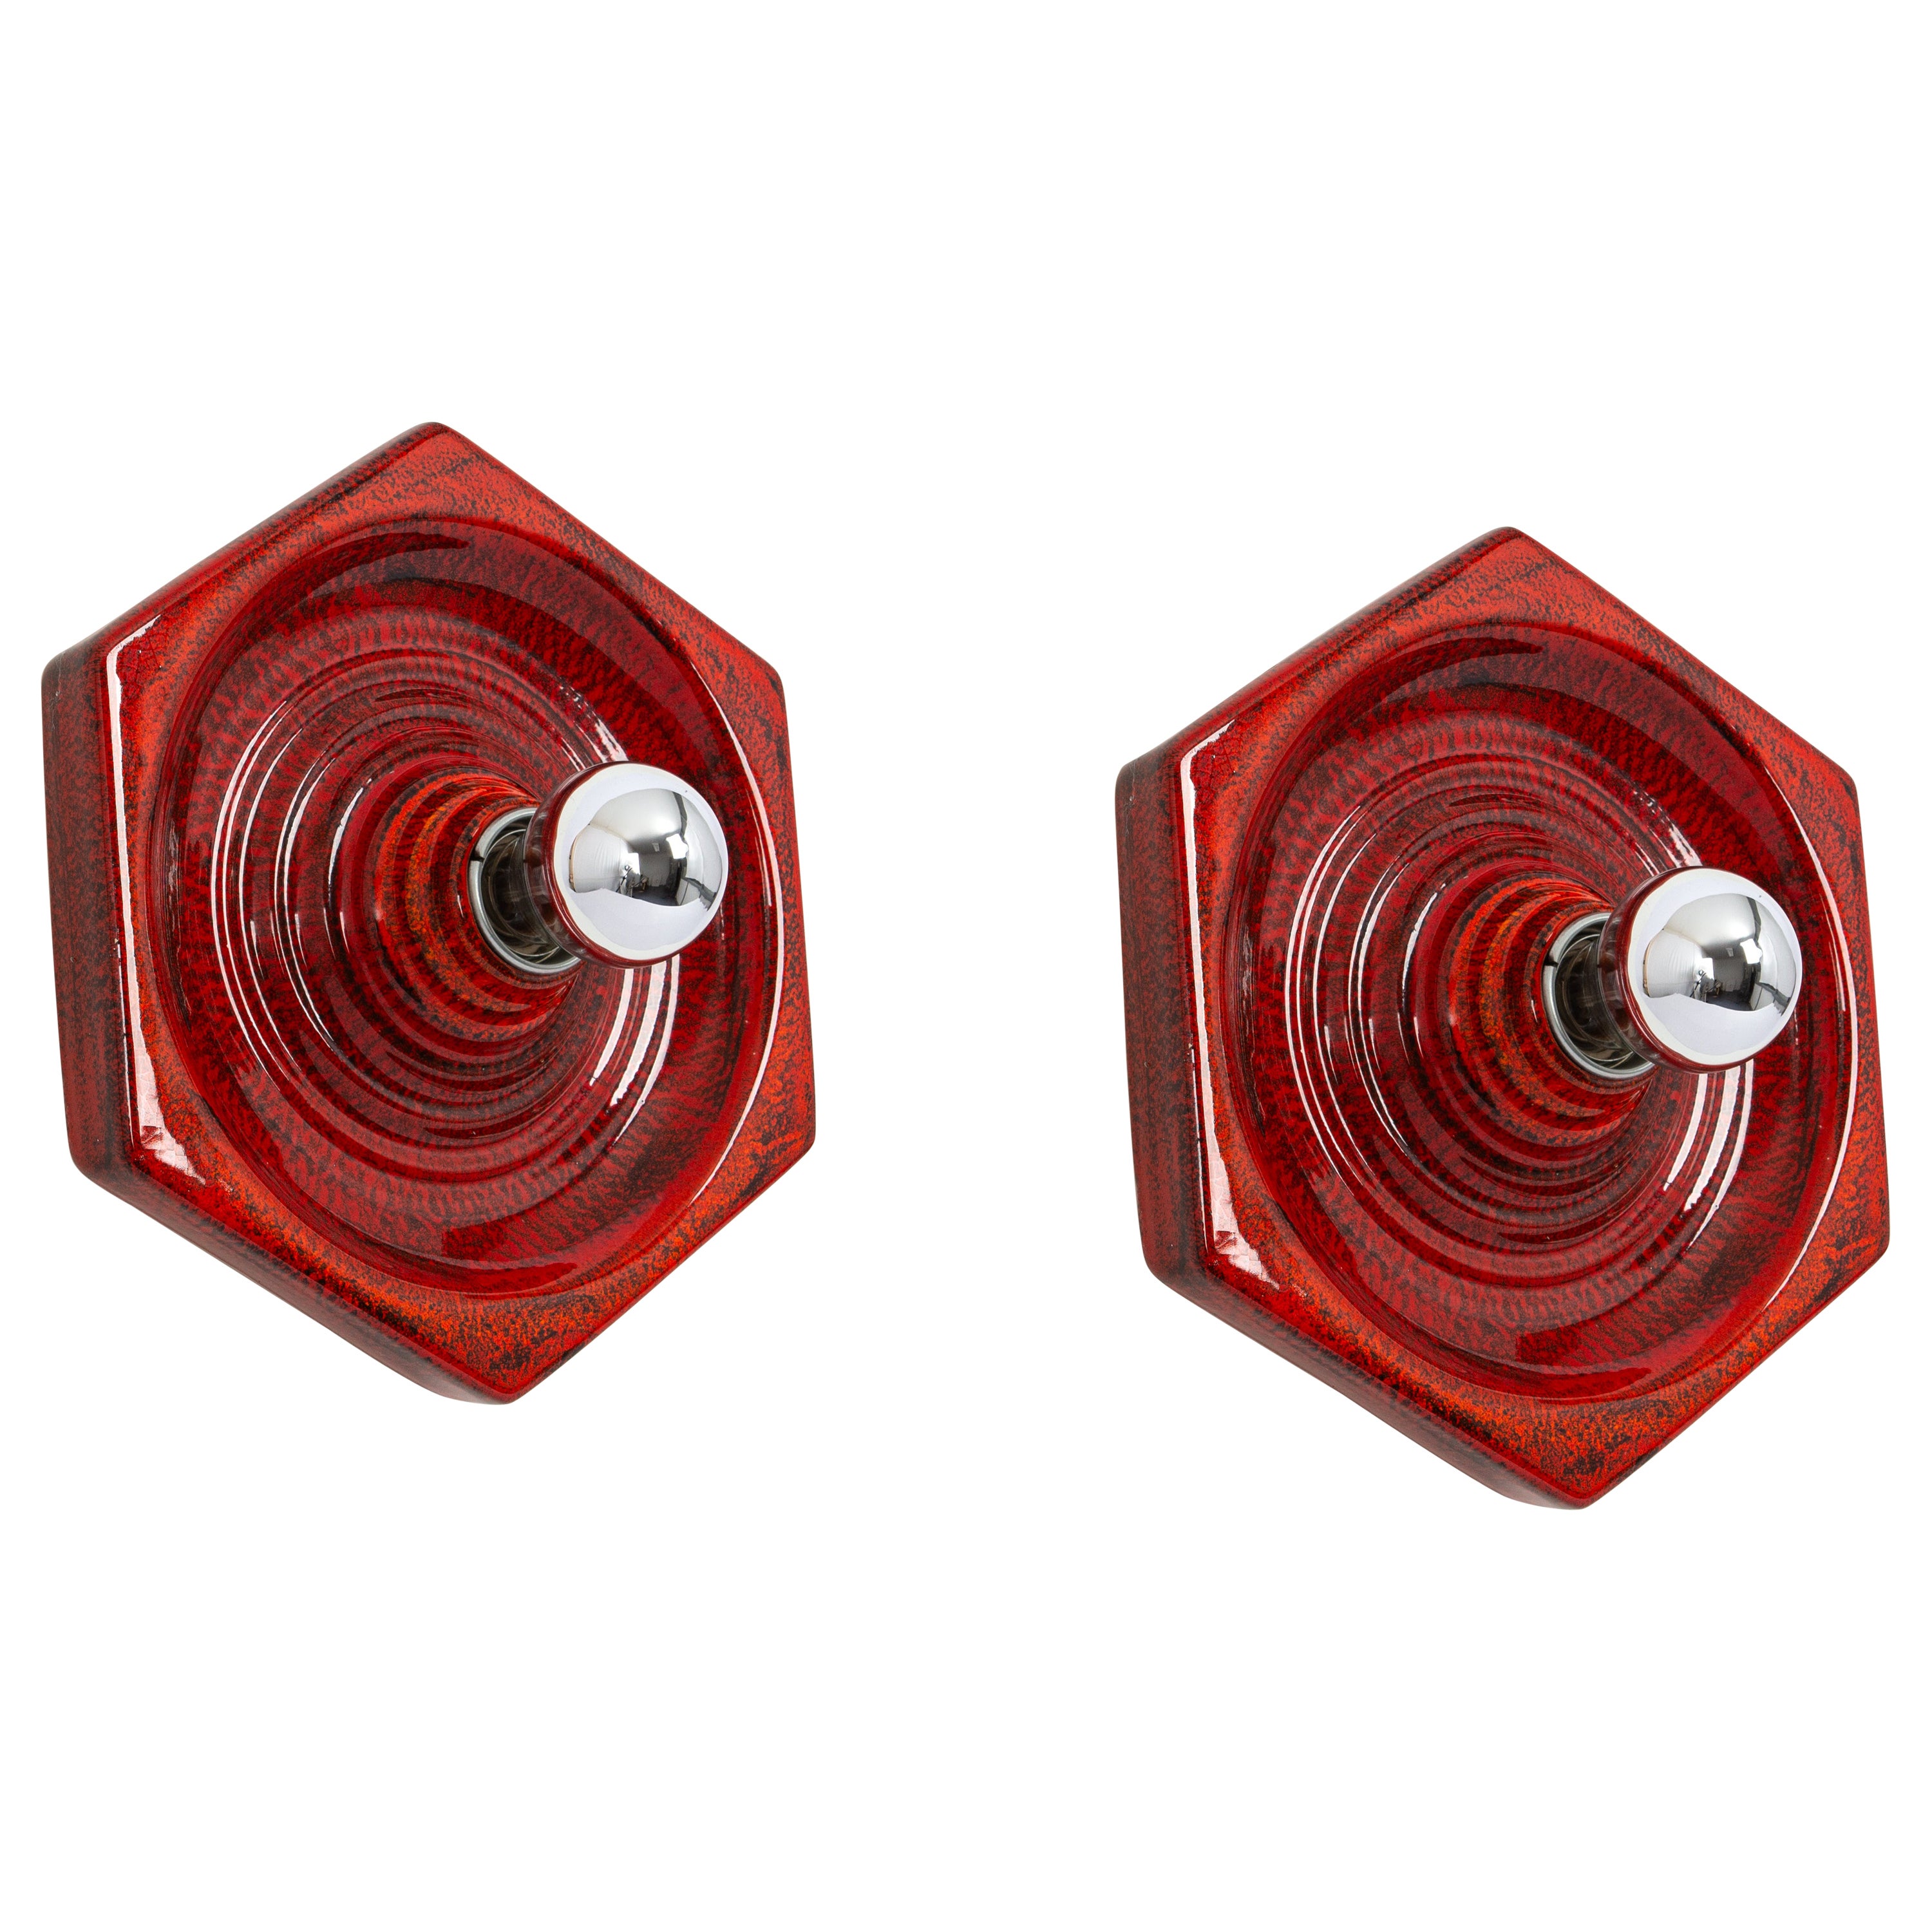 Pair of Ceramic Red and Orange Wall Lights, Germany, 1970s For Sale